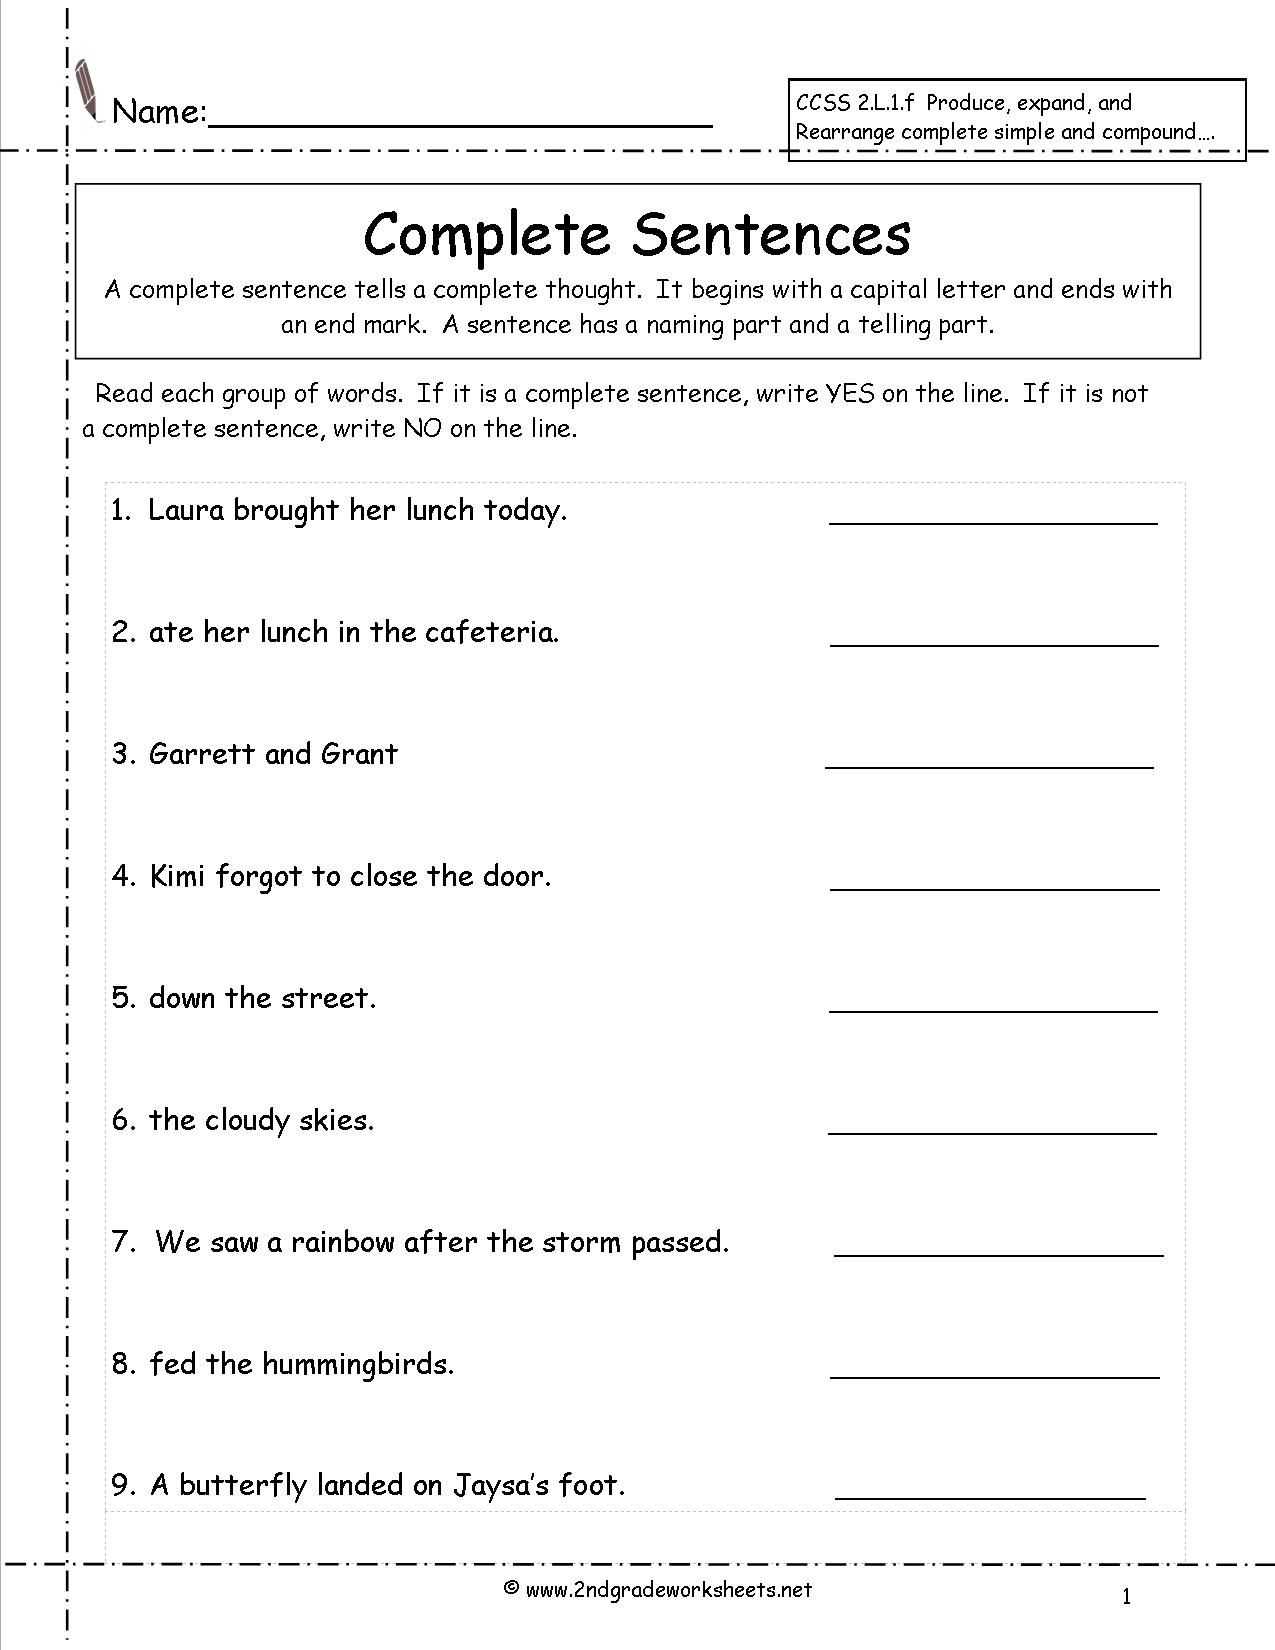 Writing Complete Sentences Worksheets or Second Grade Sentences Worksheets Ccss 2 L 1 F Worksheets